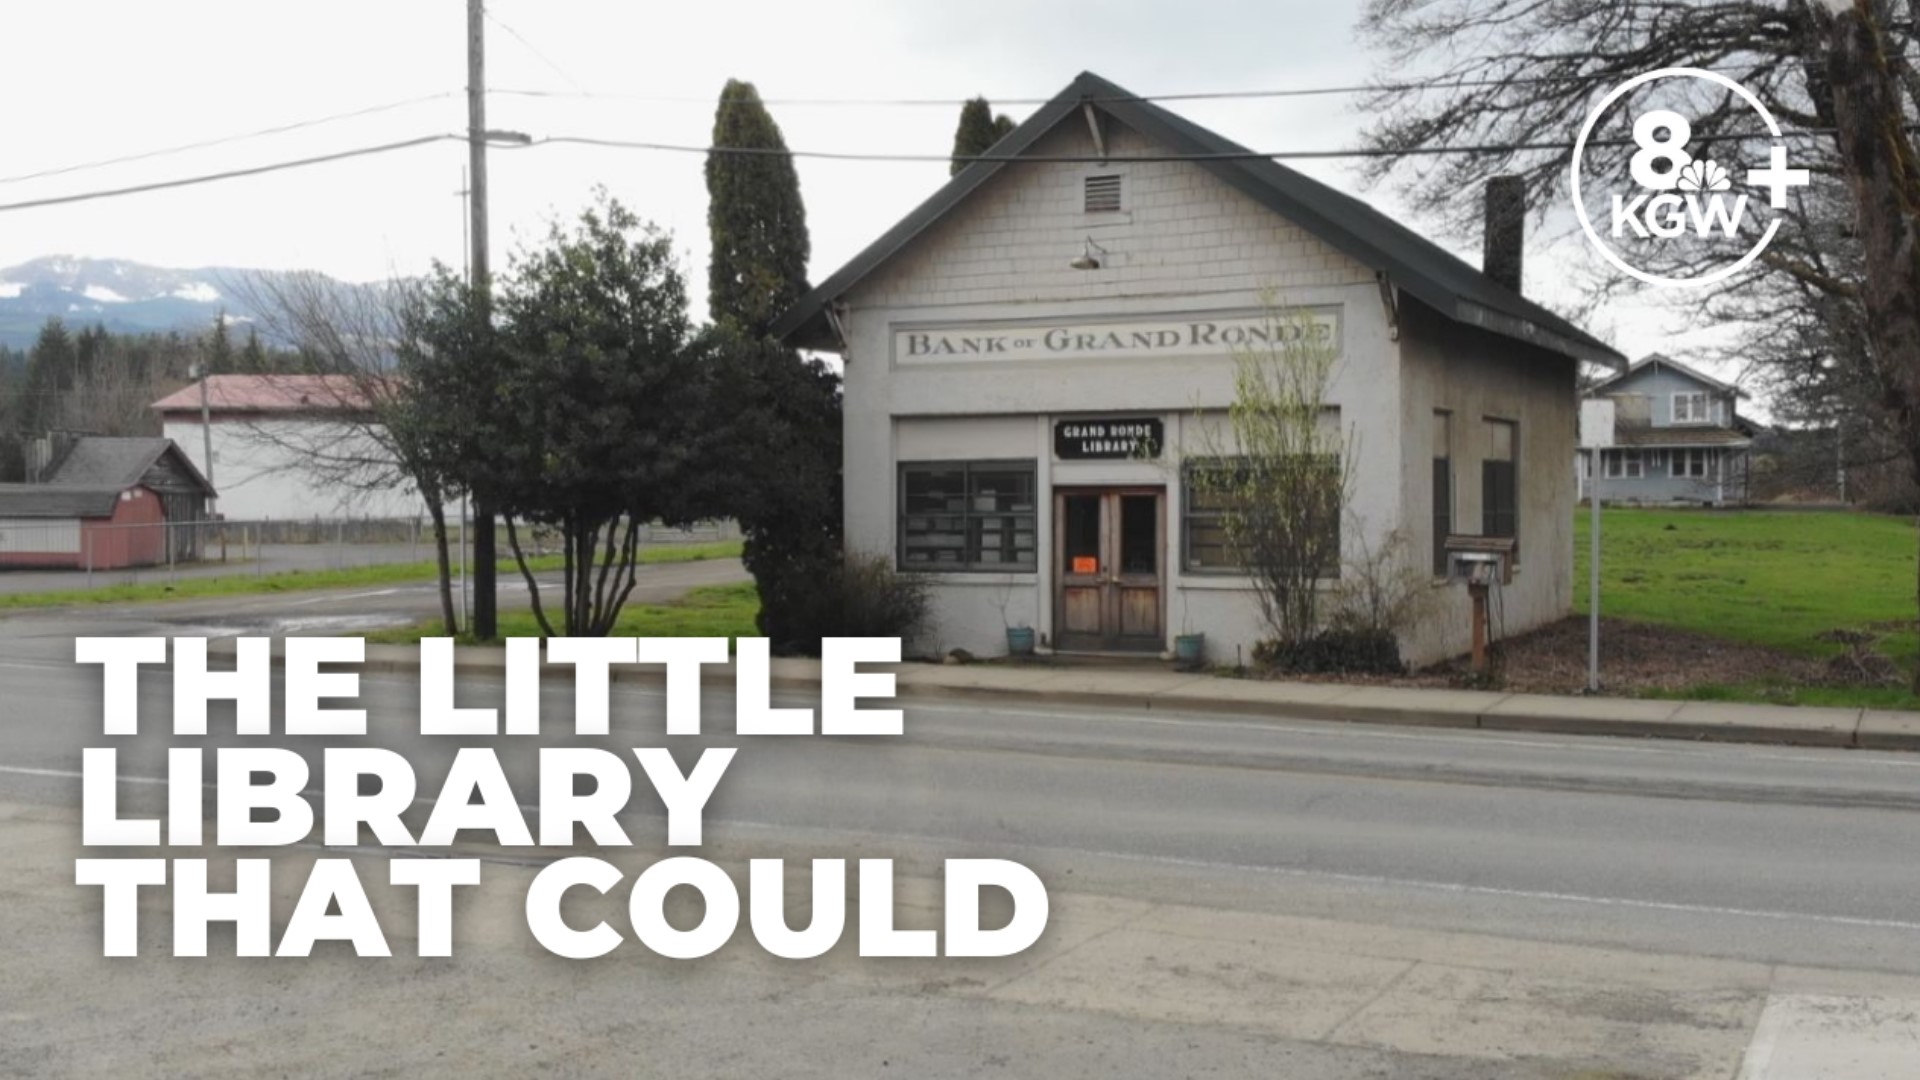 Every Monday for a decade — but one — a dedicated librarian has opened the doors of the historic little Grand Ronde Library for the curious to discover and share.